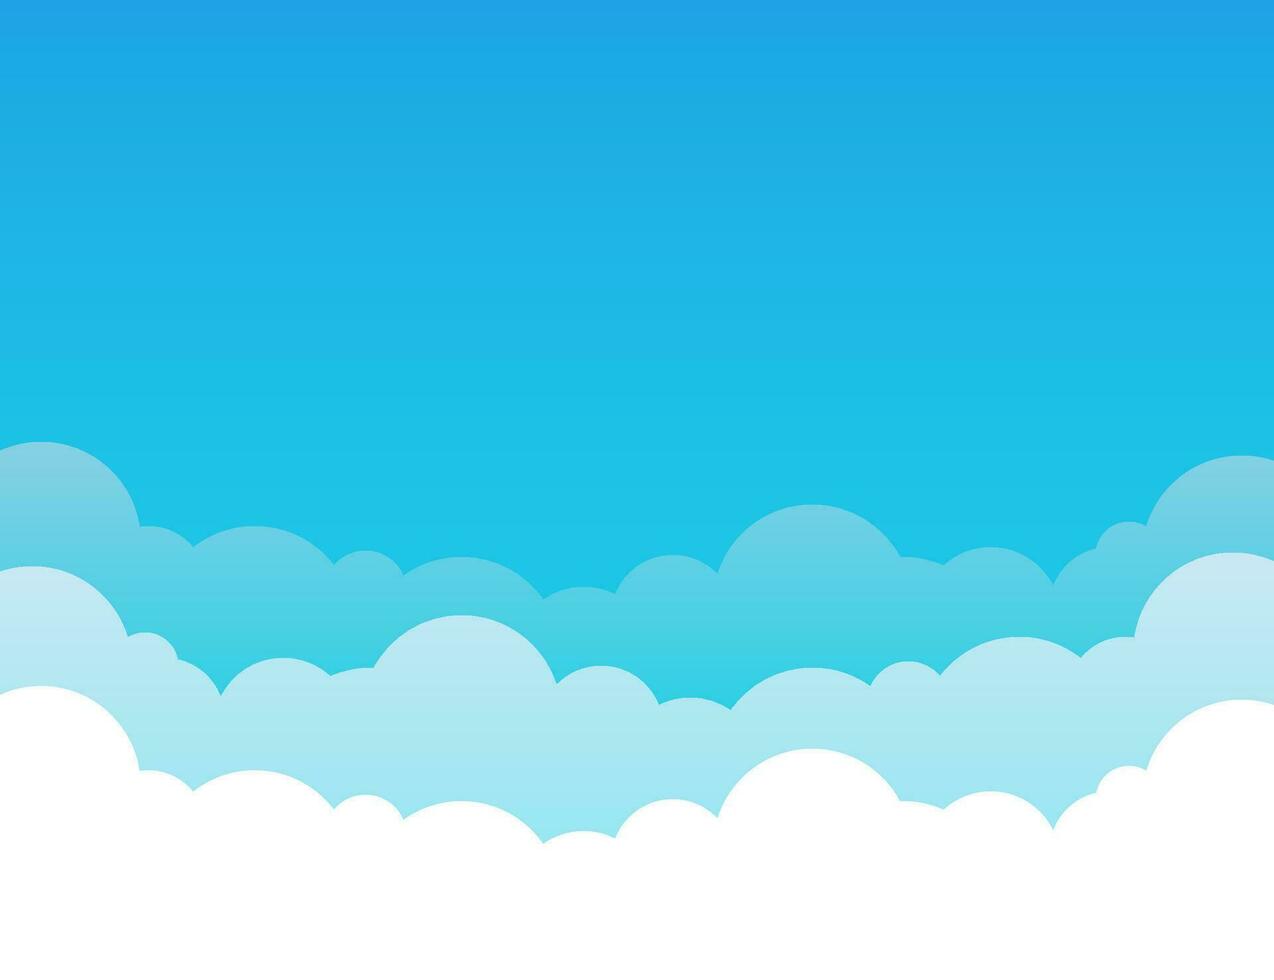 Blue clouds in sky wallpaper. Seamless pattern of cloudscape. Cumulus layer in bubble style with gradient. Colorful clouds on blue background. Light fluffy pattern. Vector EPS 10.